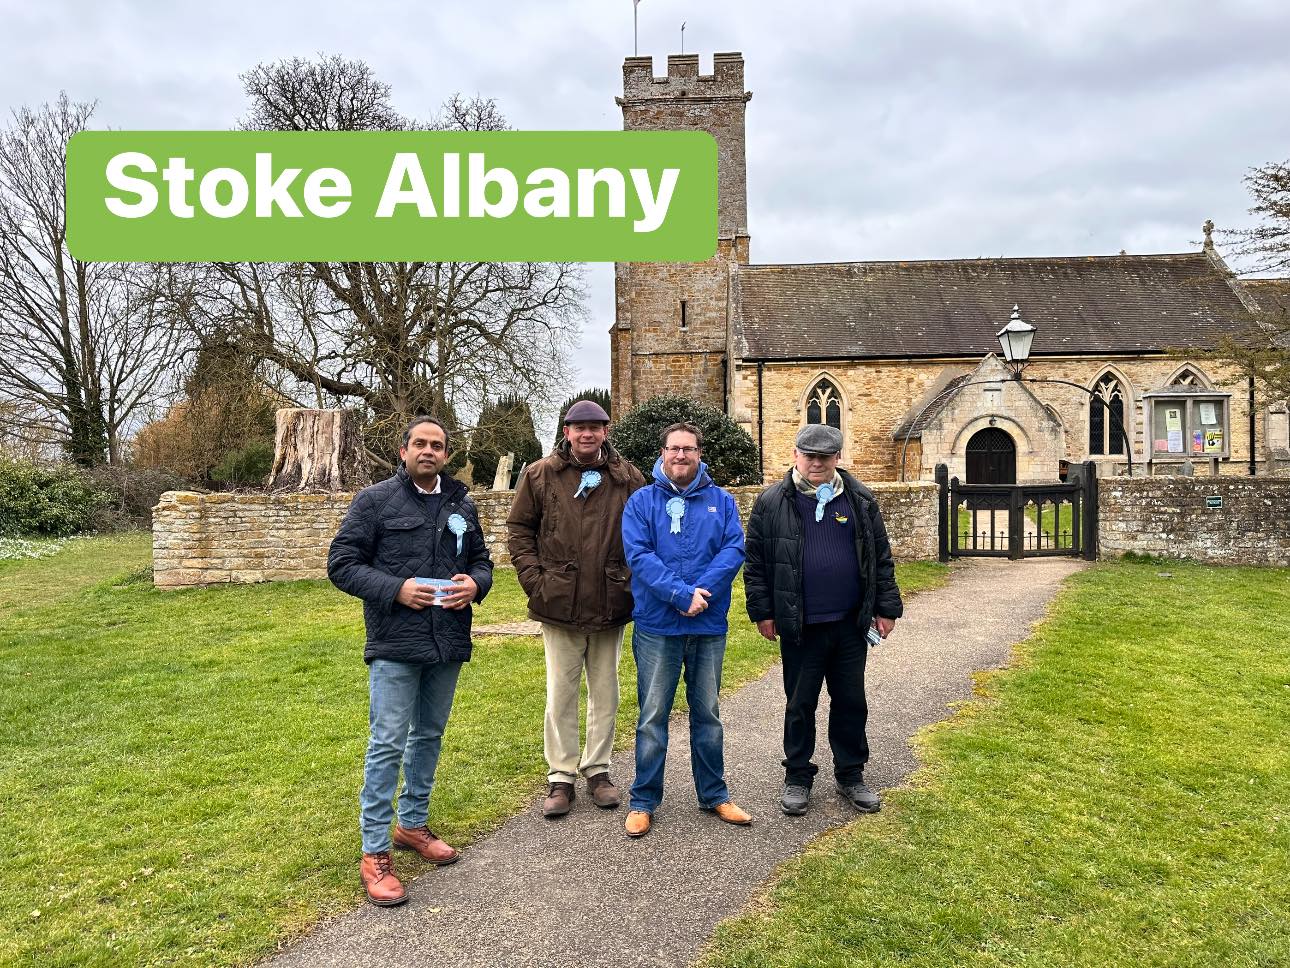 Stoke Albany Conservatives Philip Hollobone MP and local councillors